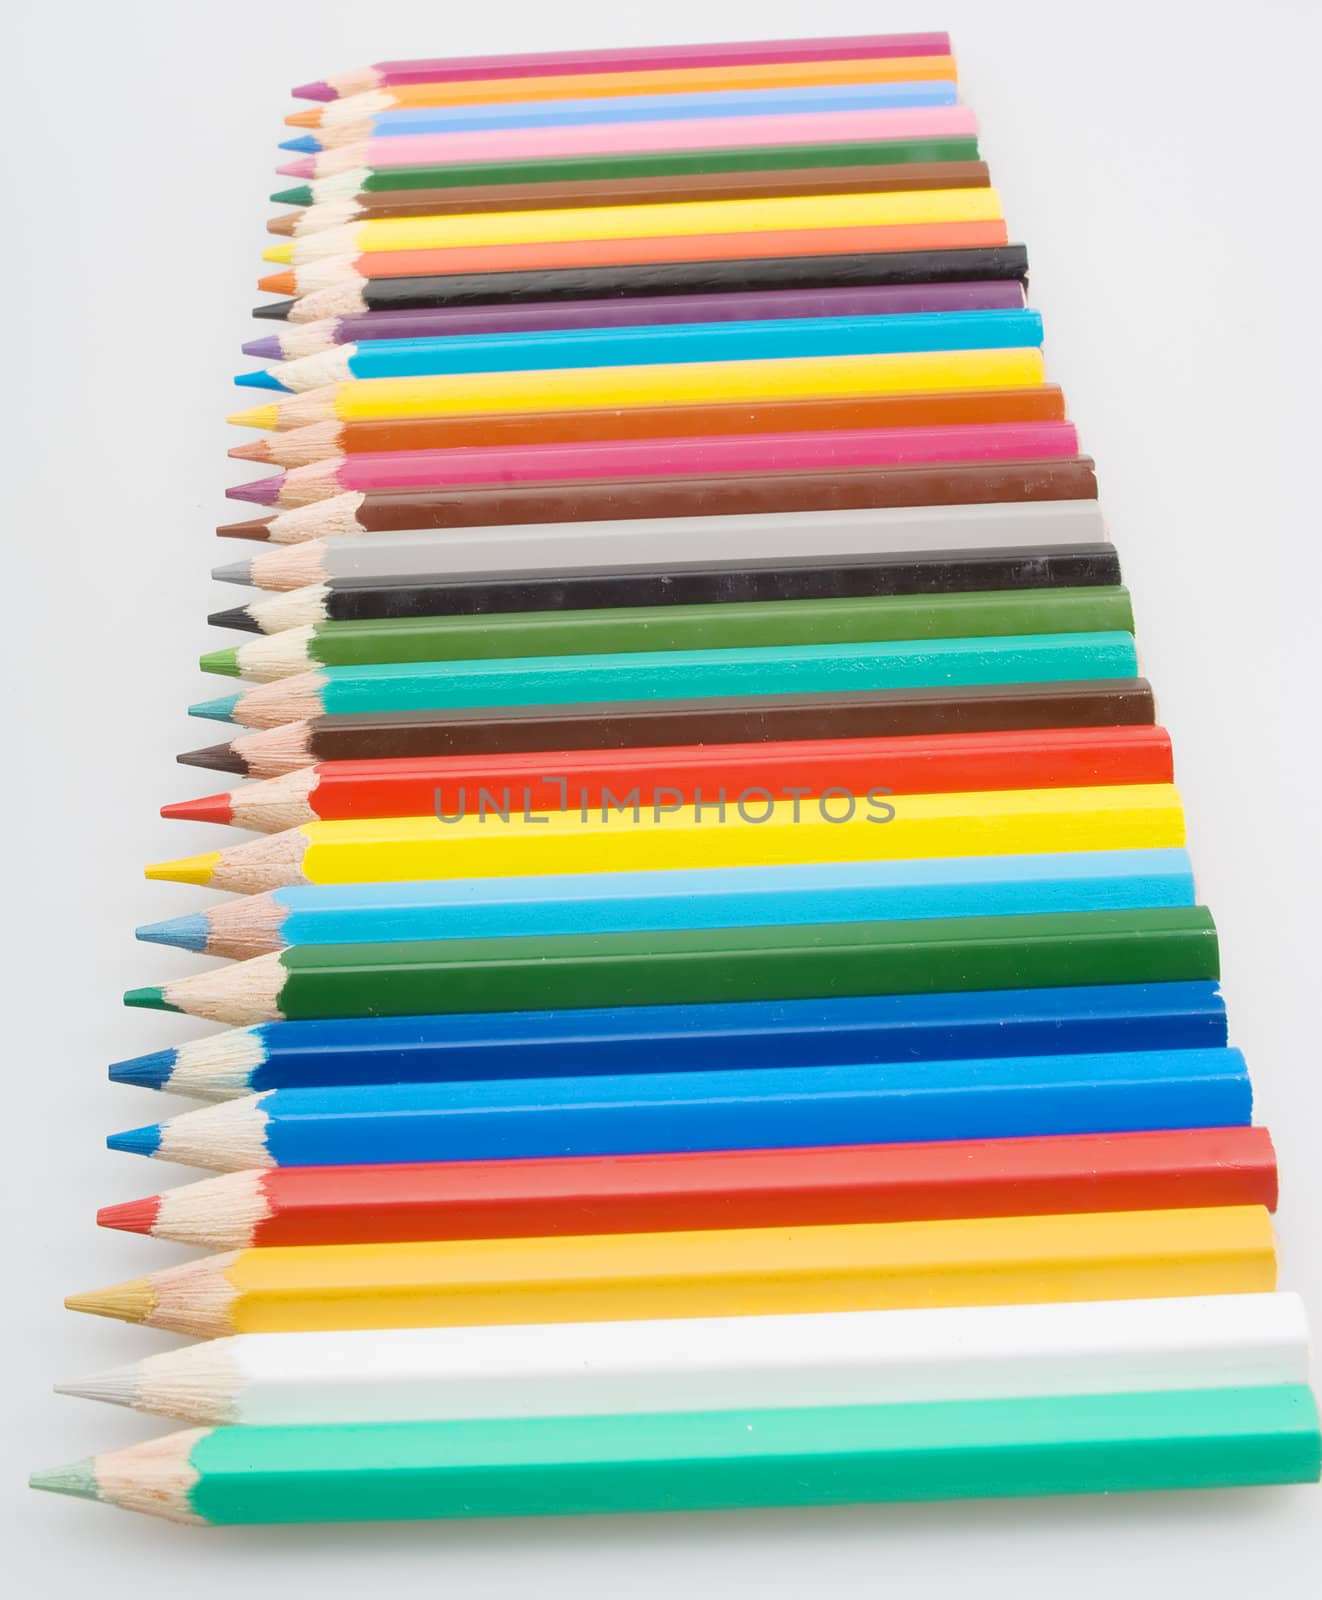 Group of color pencils by BIG_TAU